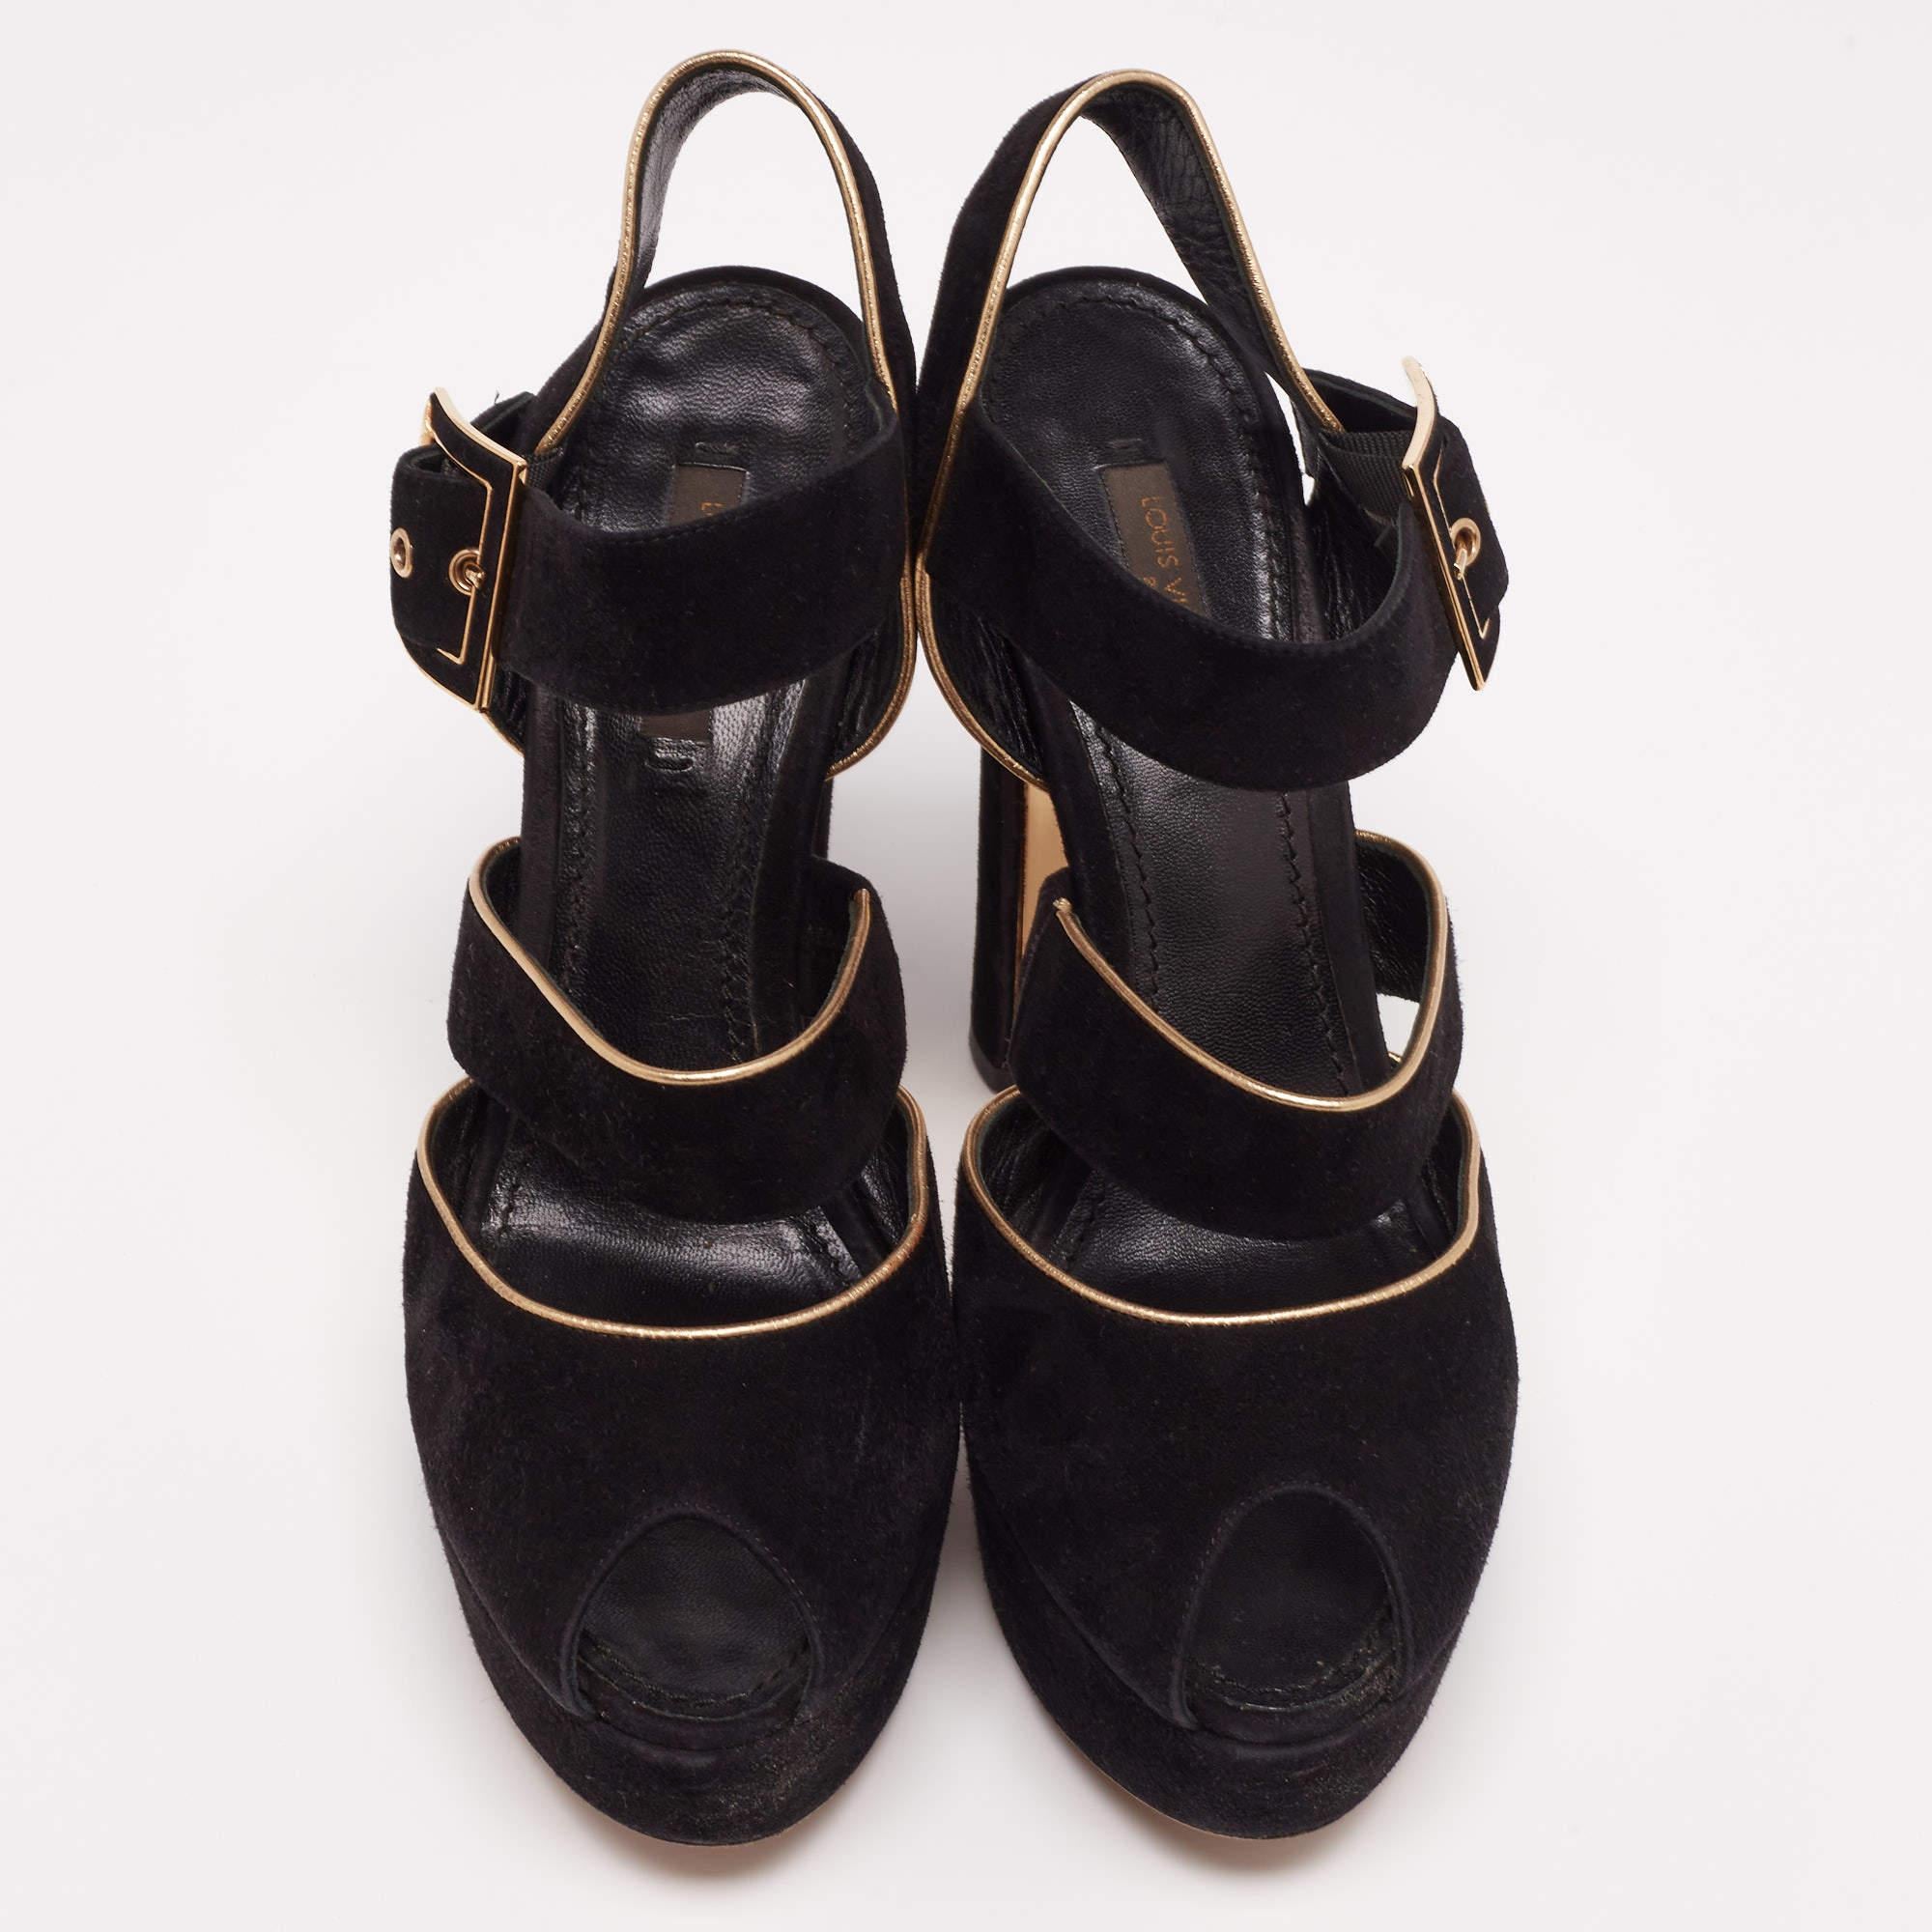 This classy pair of sandals from Louis Vuitton looks even better on the feet. The shoes have a suede exterior added with metallic trims, simple buckle closure, and open toes. They are lifted on platforms and 12.5 cm heels.

Includes: Original